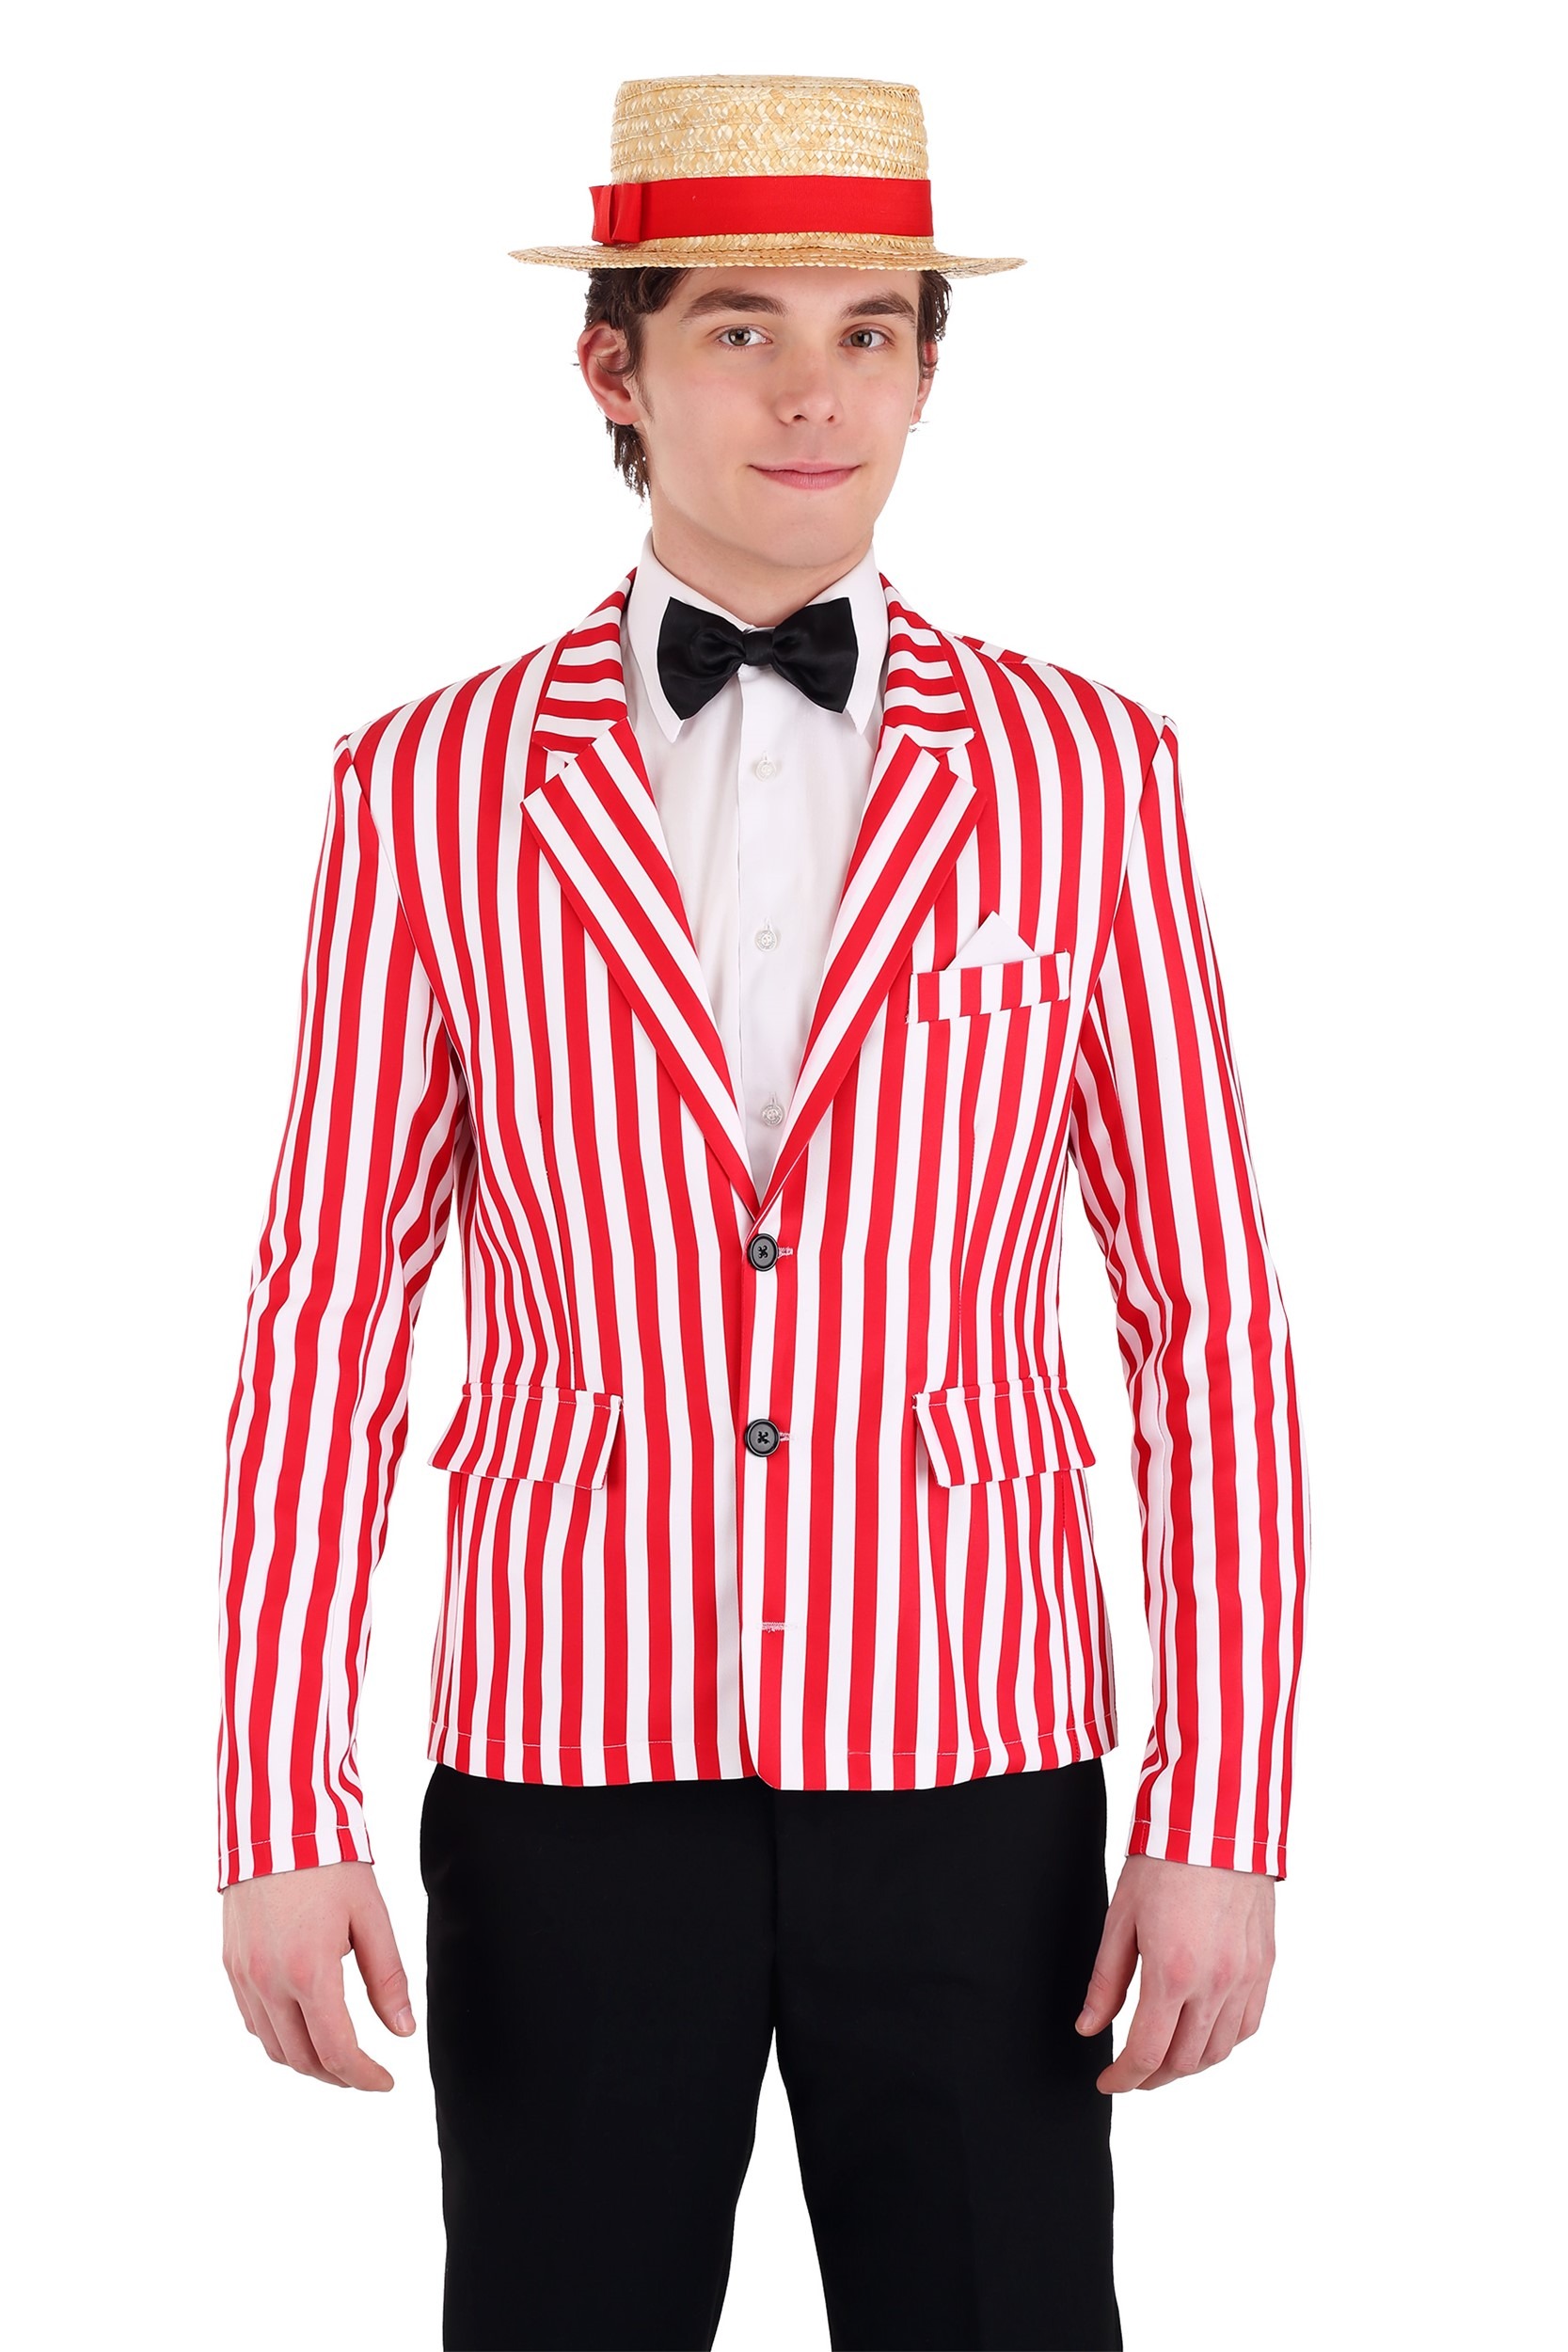 Candy Striped Jacket Men's Costume